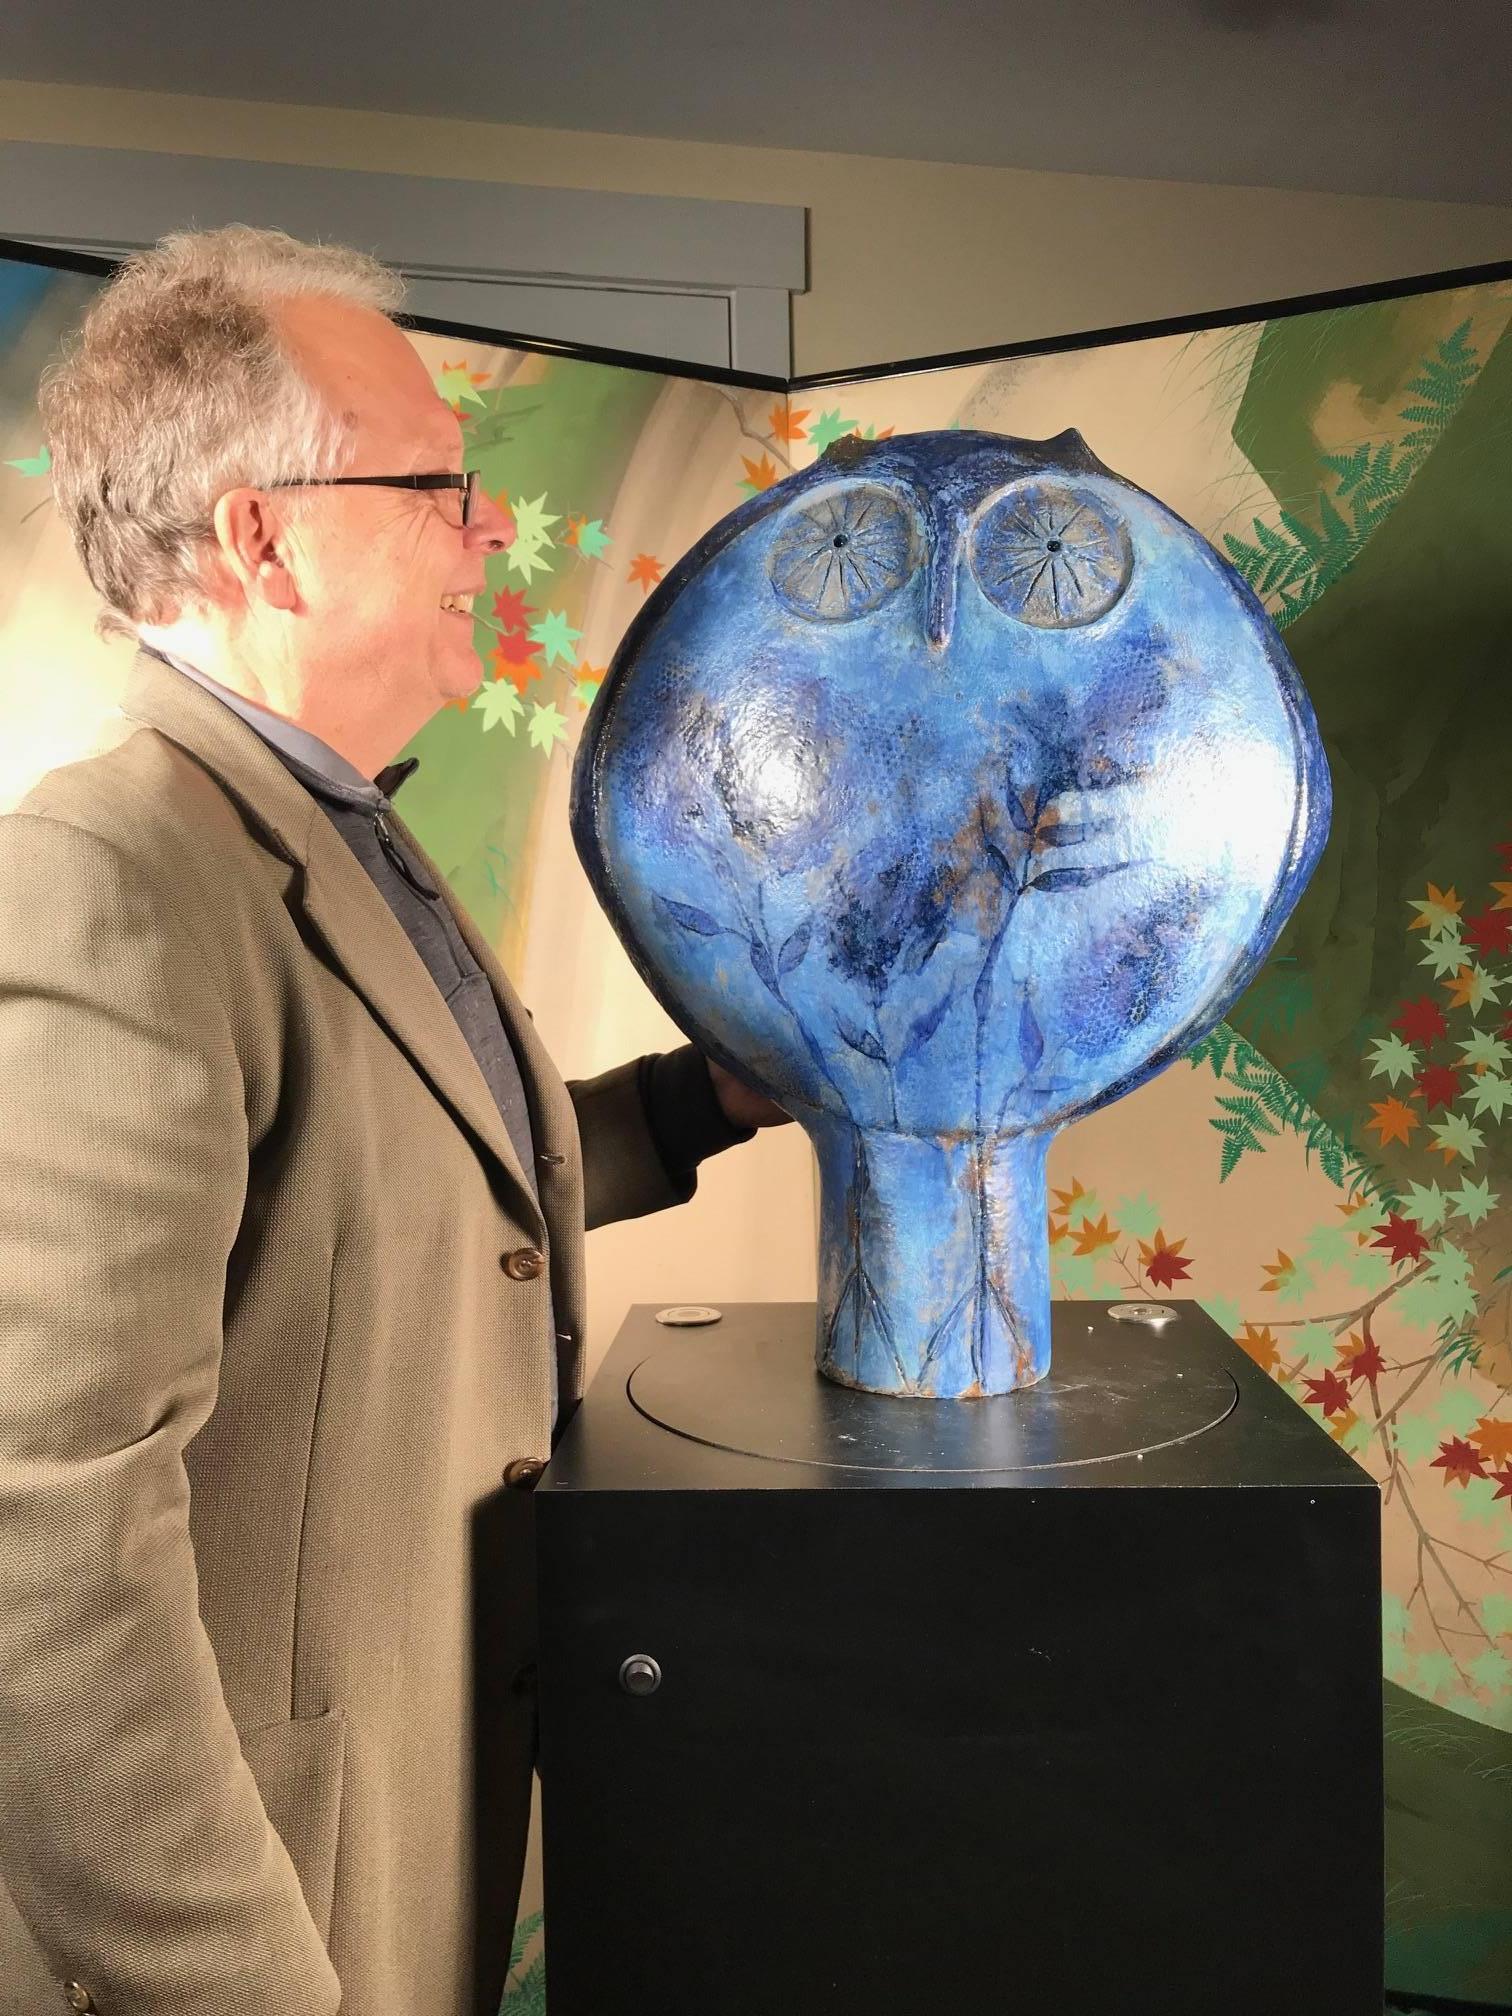 A one-of-a-kind monumental iconic huge owl sculpture created, handmade, and hand-painted by master designer Eva Fritz-Lindner (1933-2017)

Handcrafted and hand-painted in beautiful colors by this artist. One of her last sculptures produced before